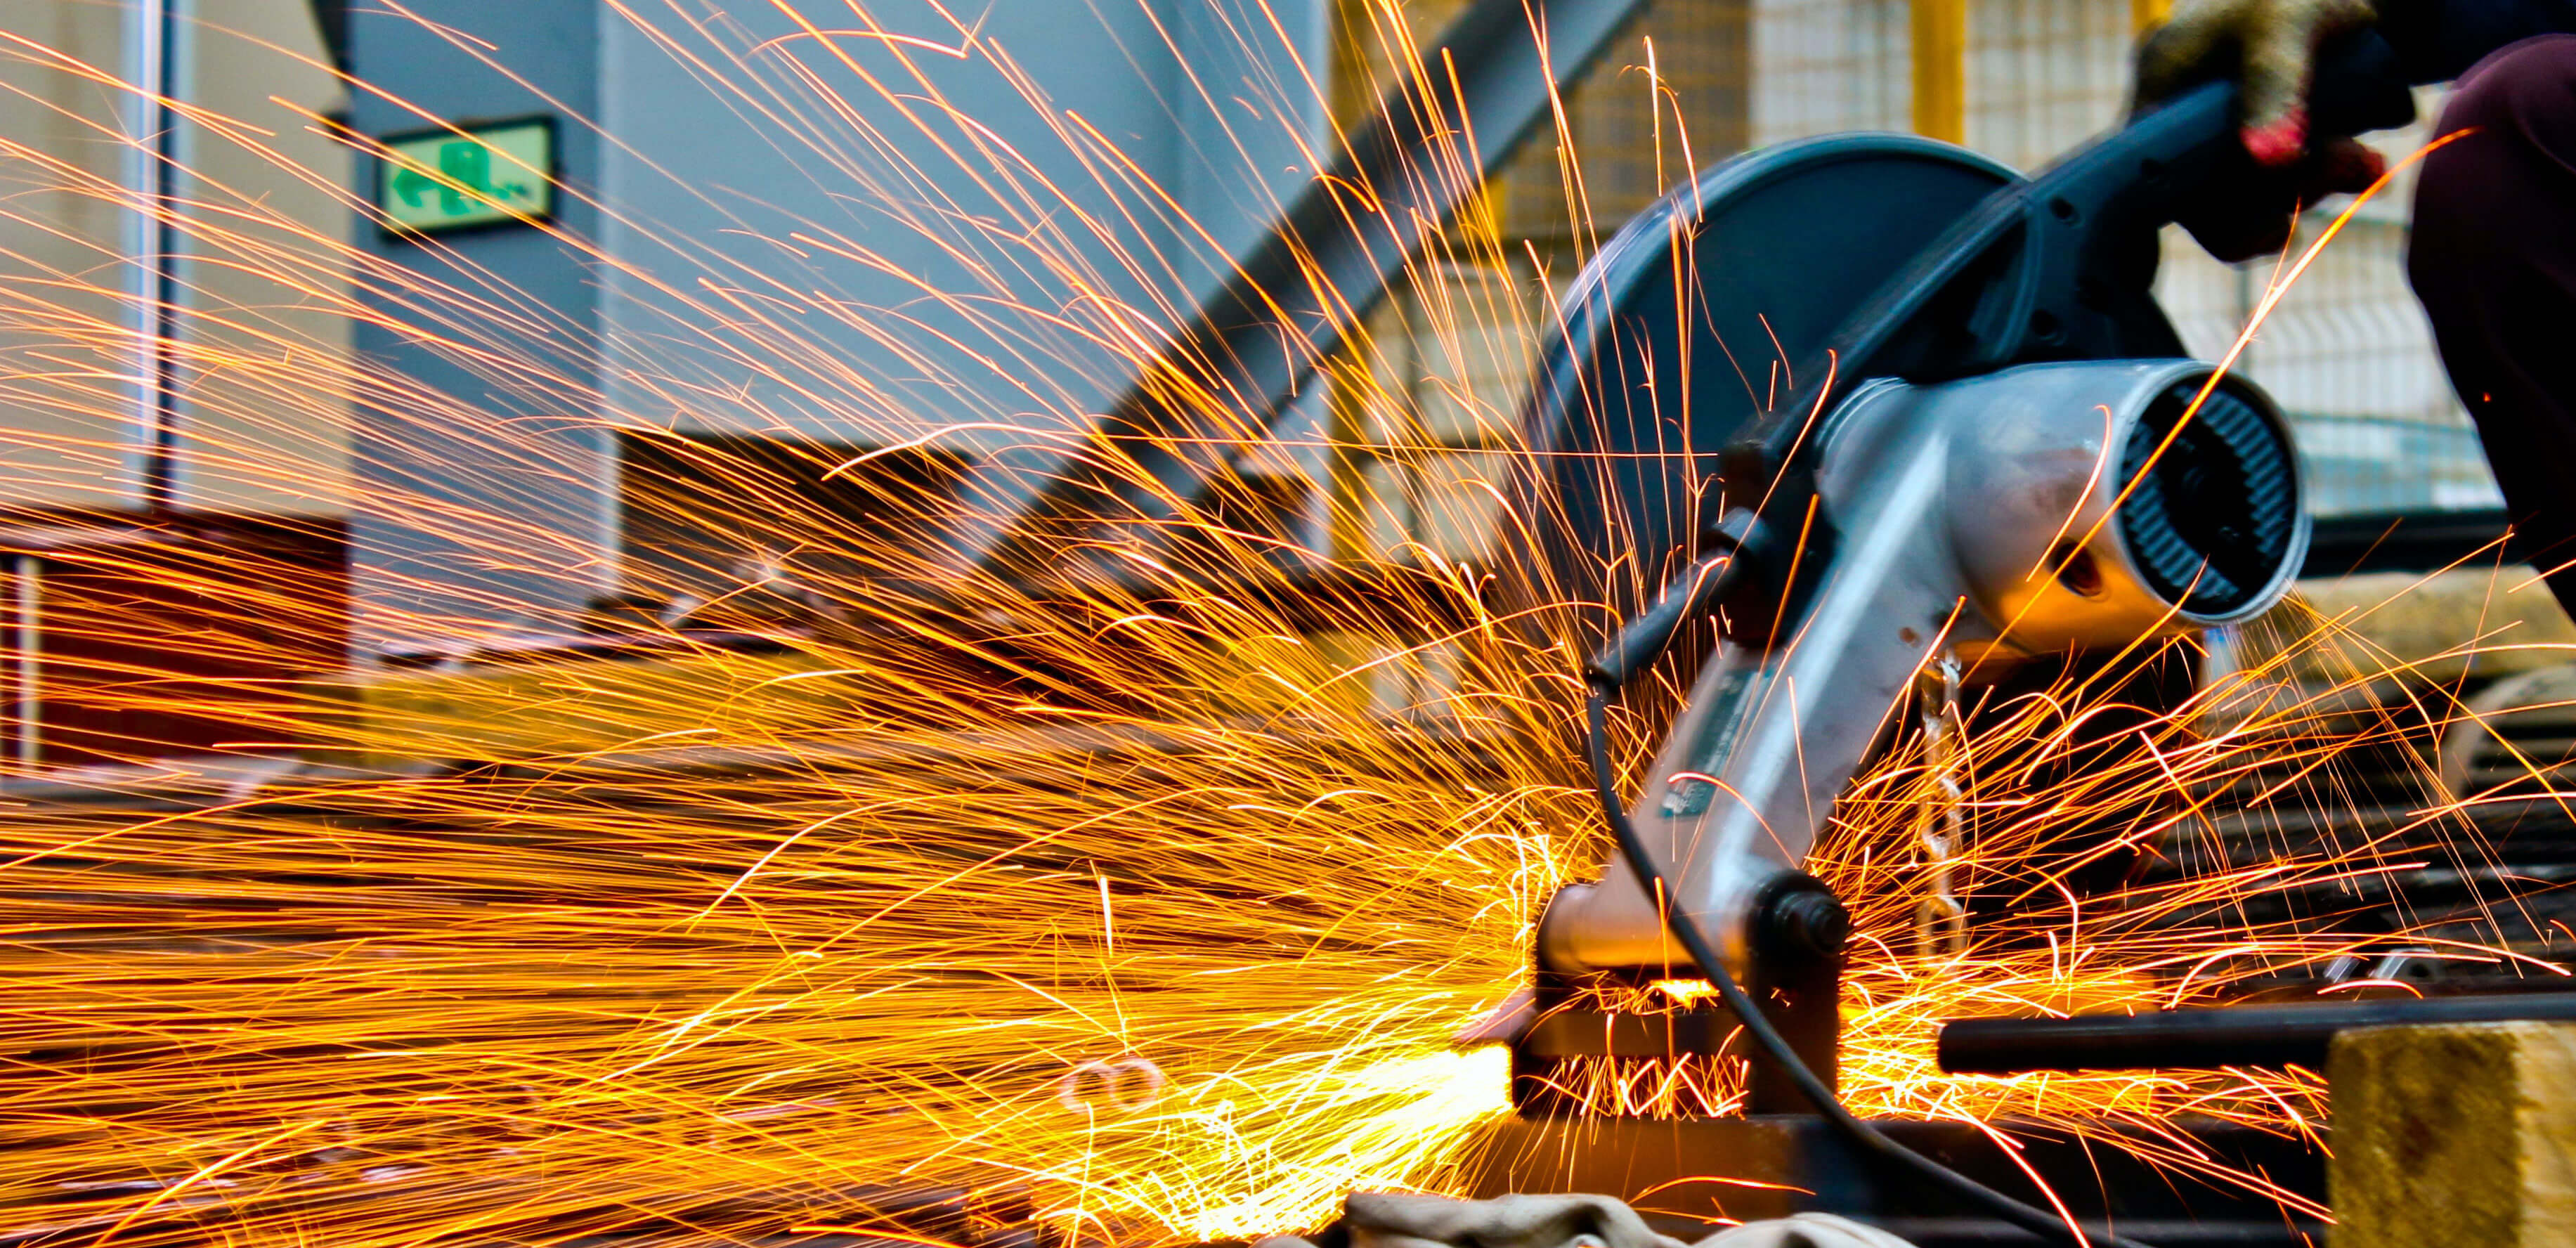 construction saw and sparks